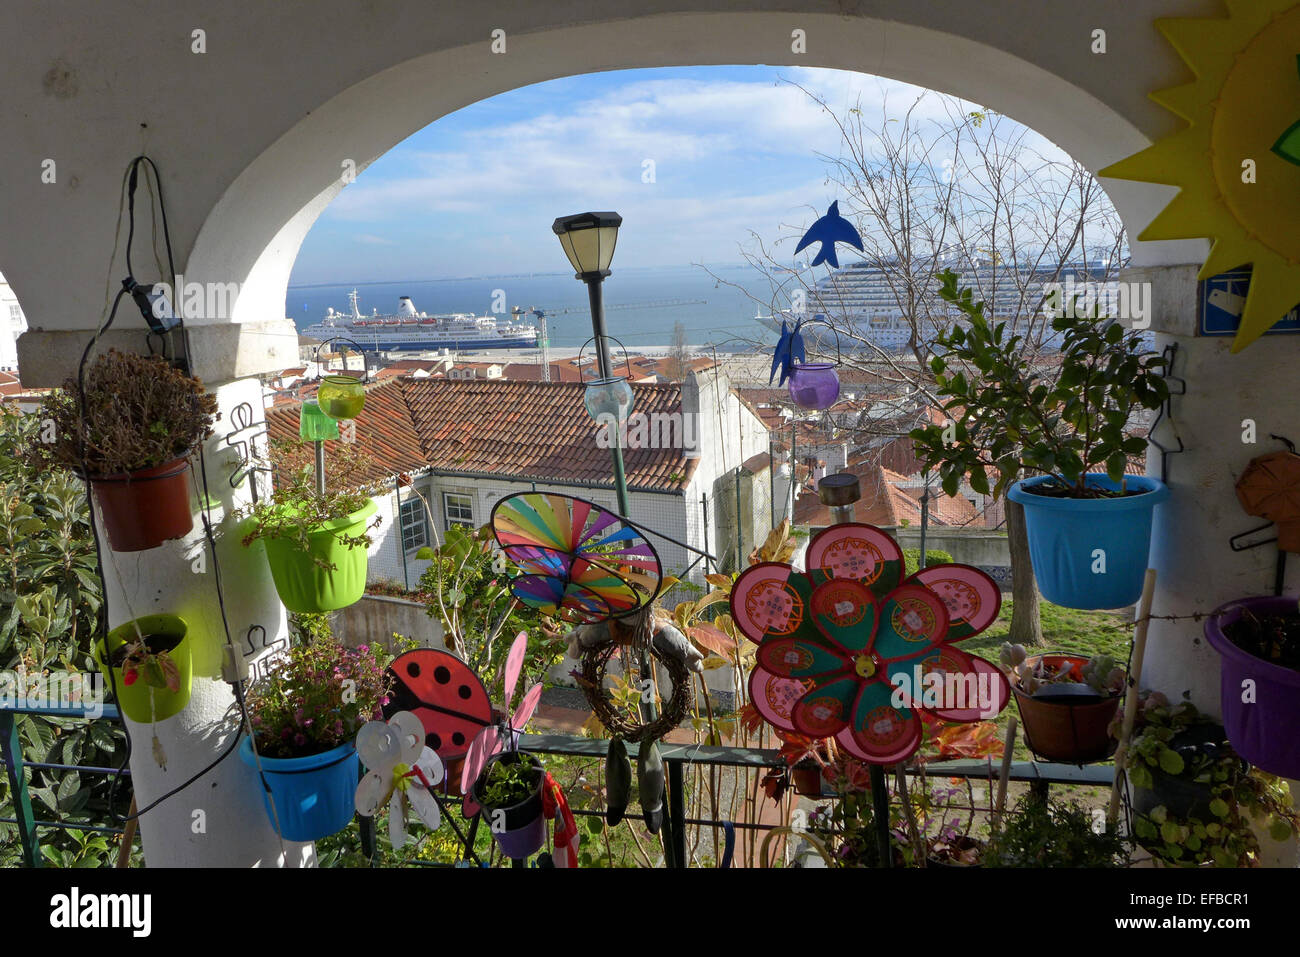 A view from a house in the Alfama district of Lisbon looking towards the Tagus river. Stock Photo